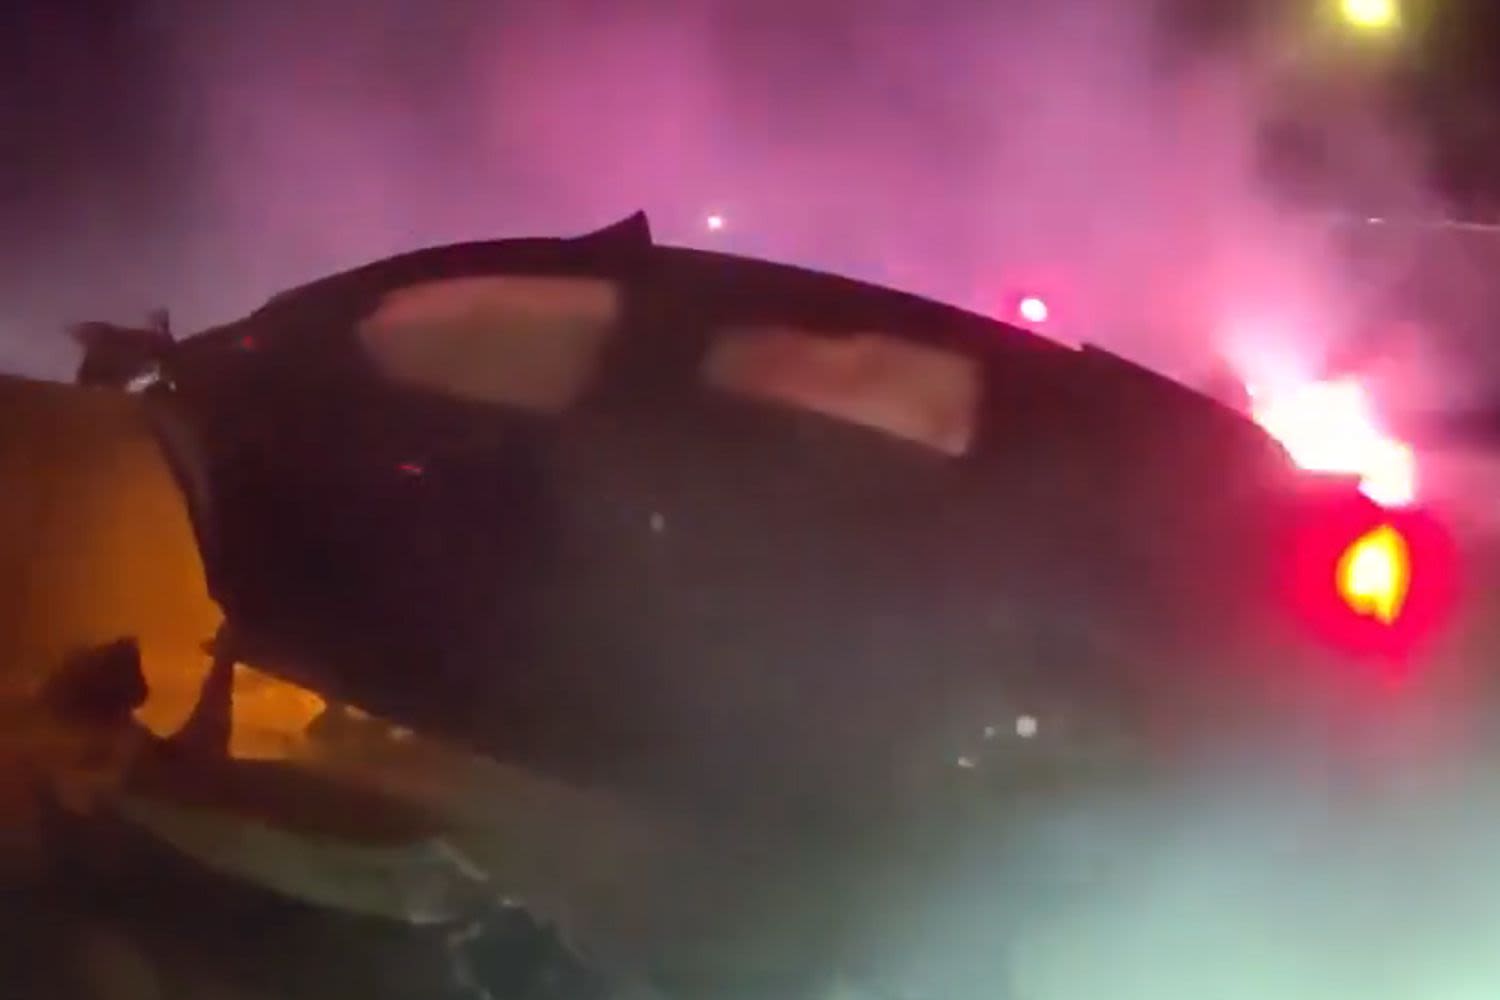 Texas Police Officer Rescues Man from Burning Car: 'I’m Not Going to Let This Guy Die on Me'